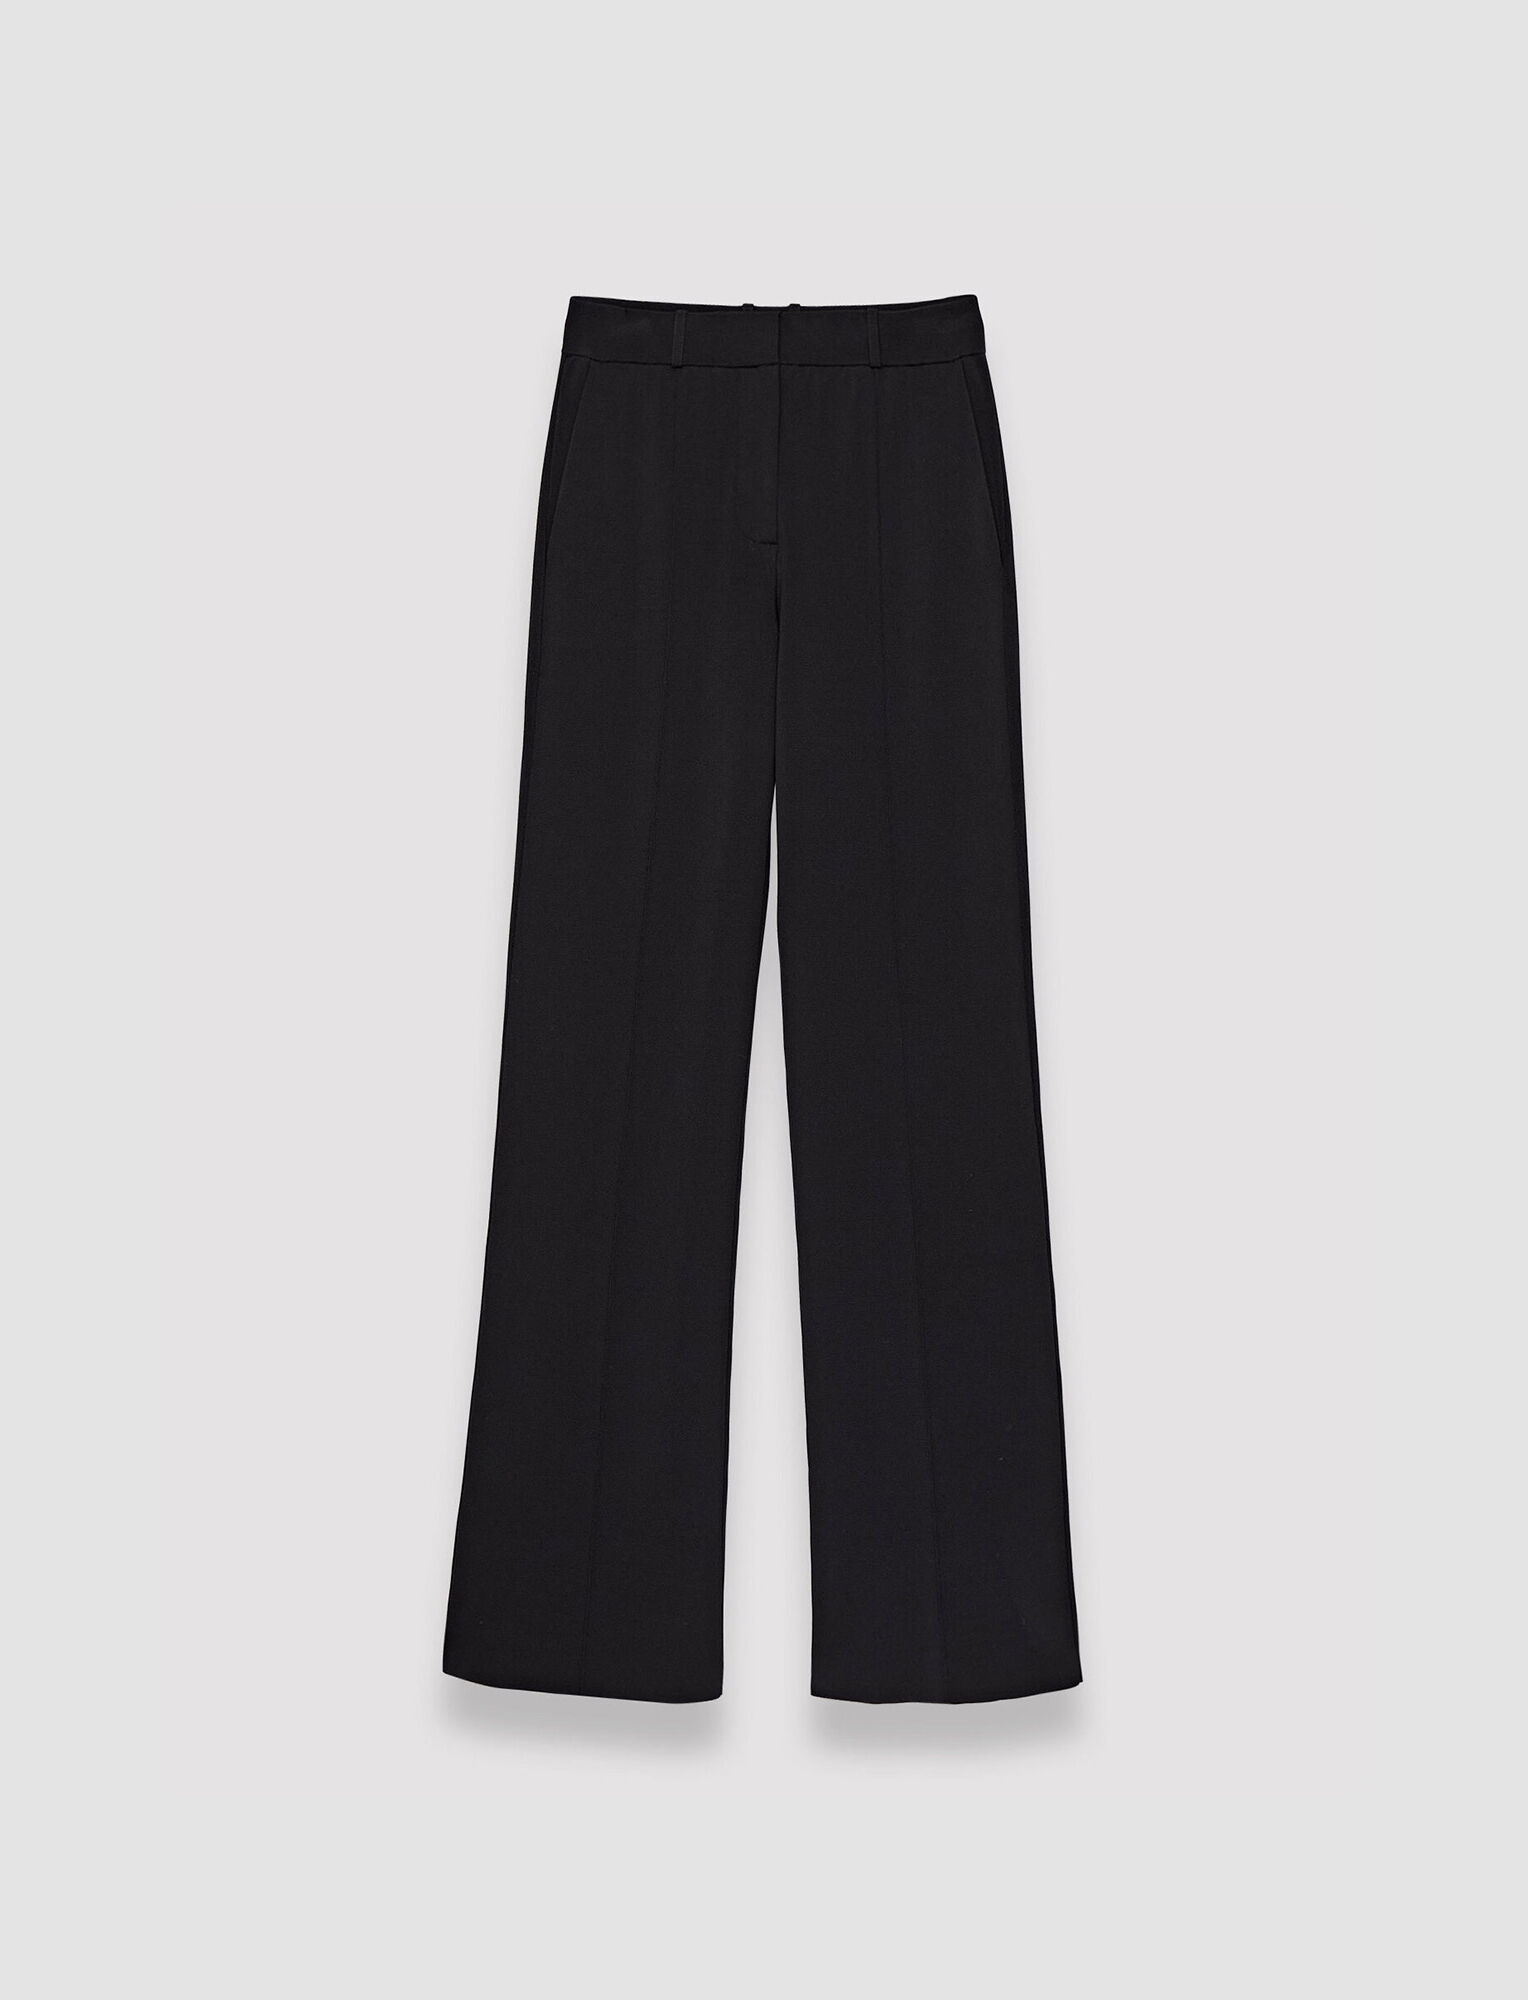 Joseph, Milano Knitted Trousers, in Black